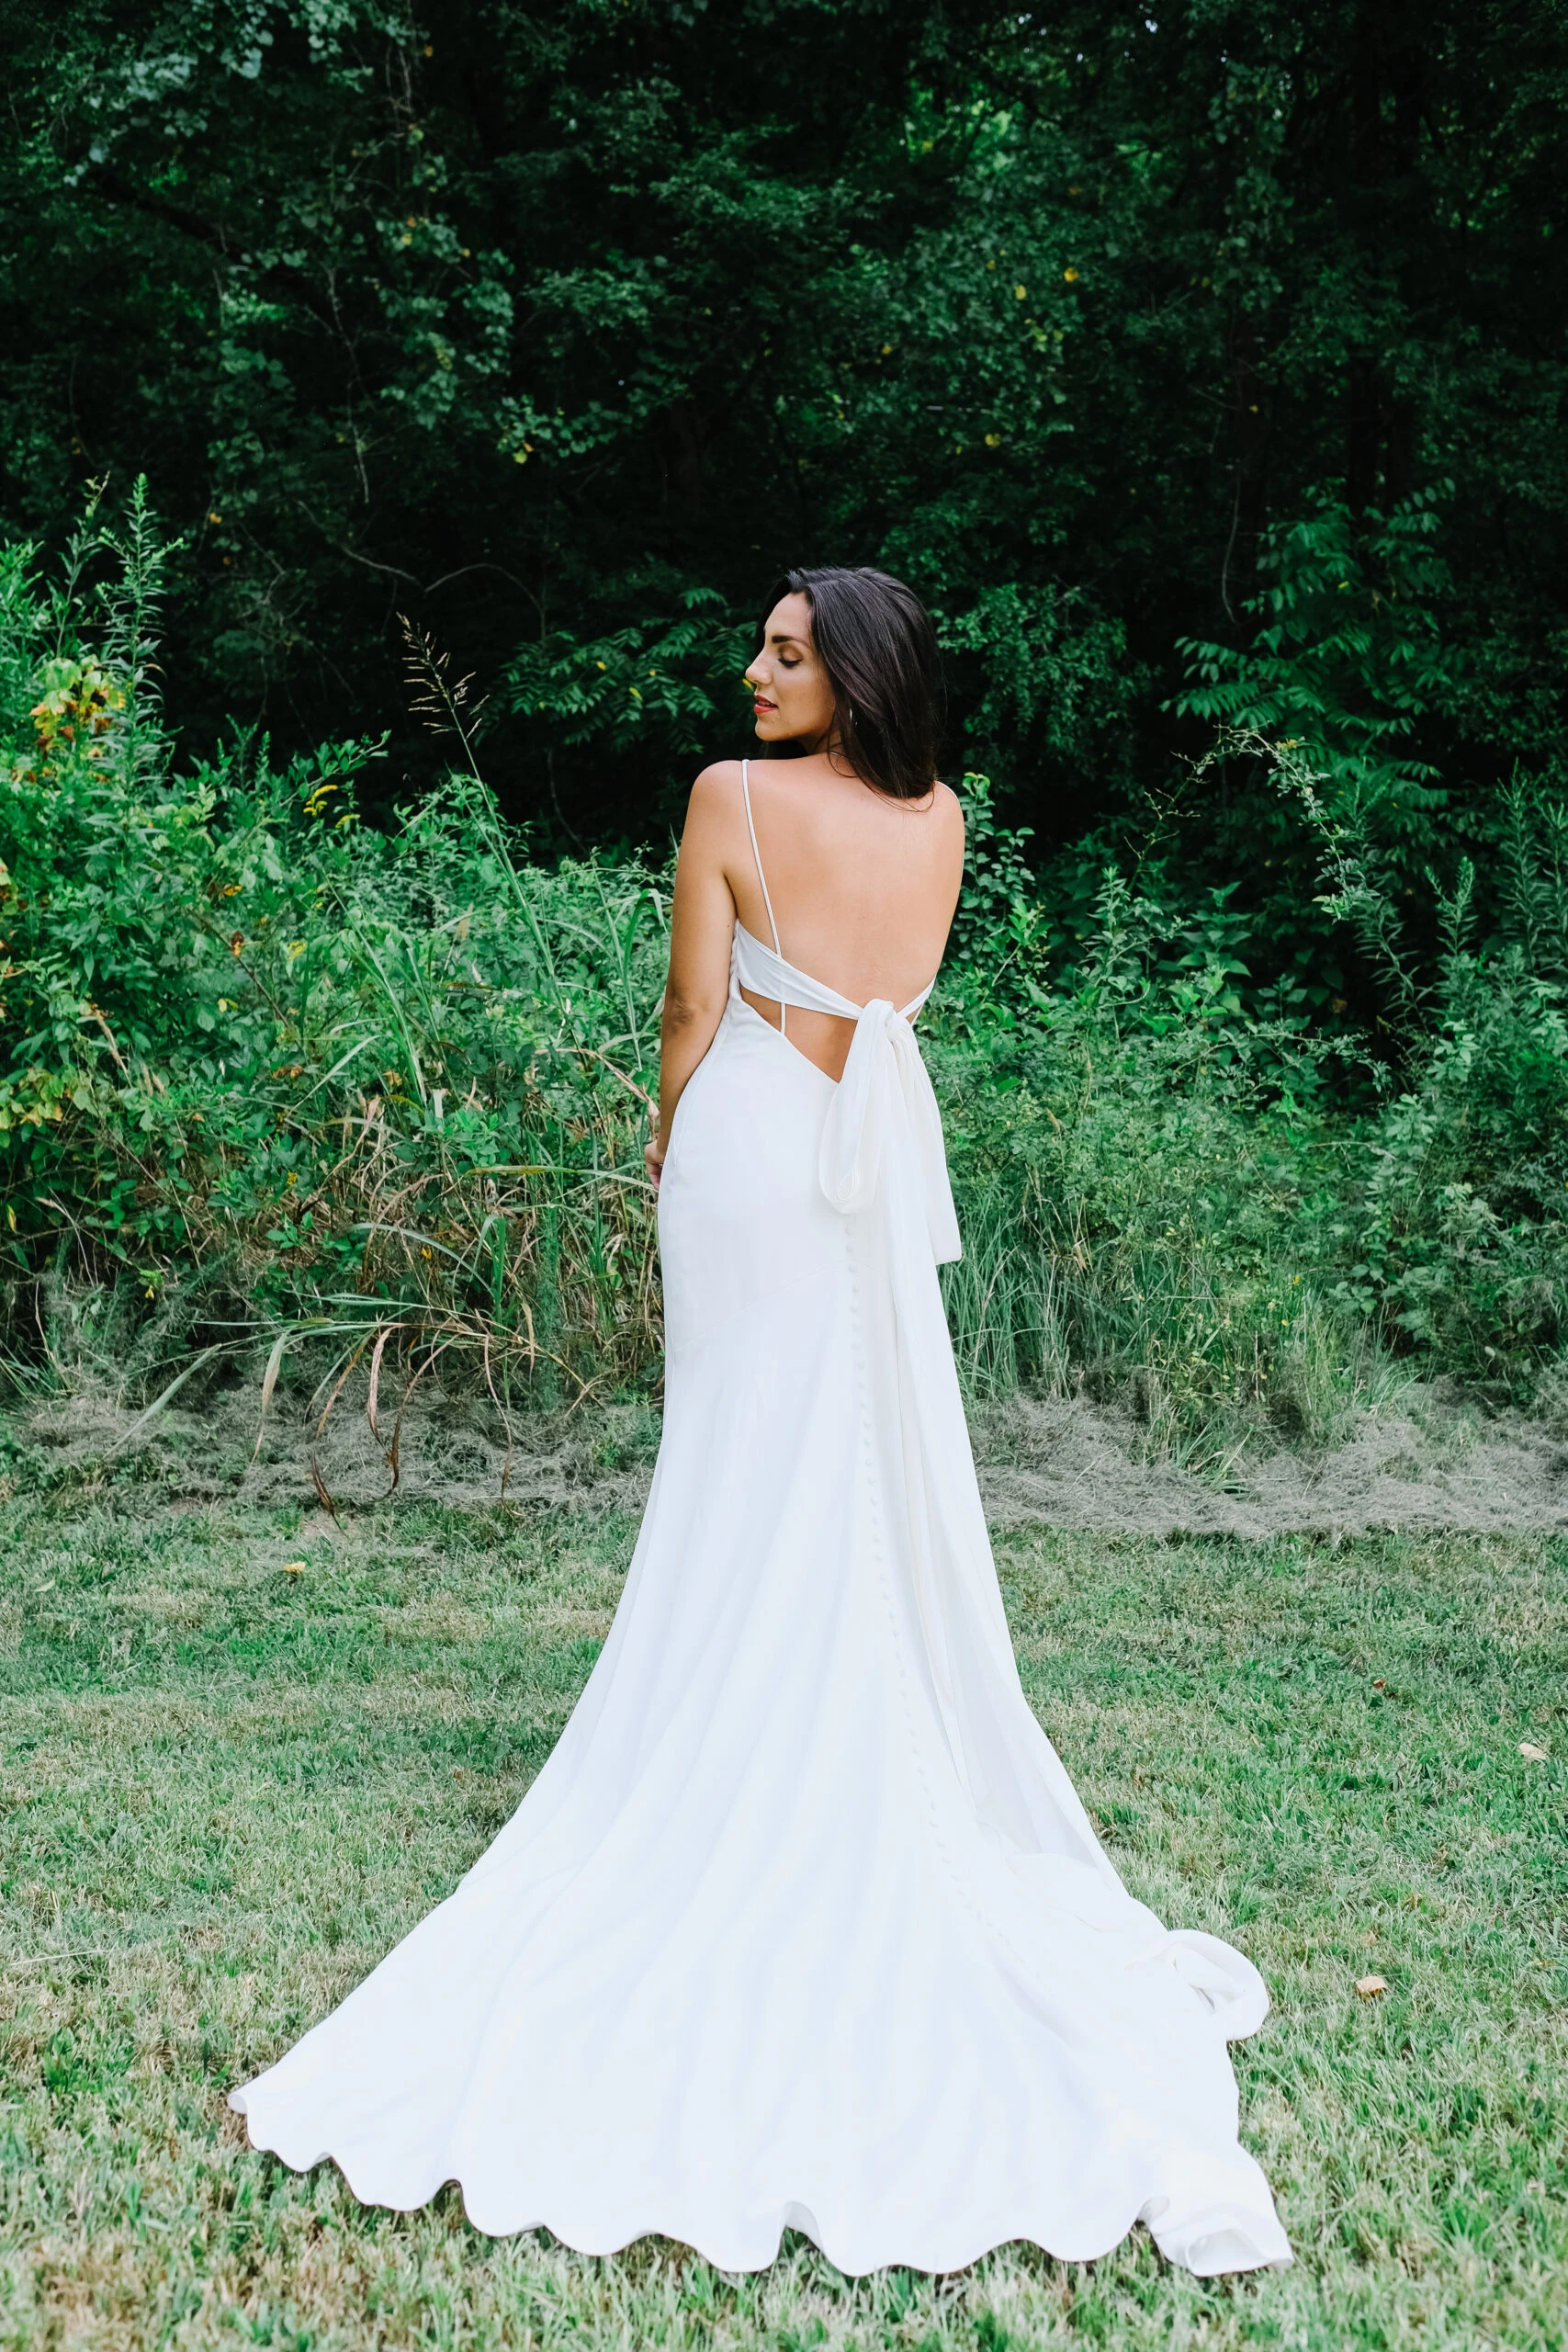 simple backless wedding dress with tie back - 7290 by Stella York